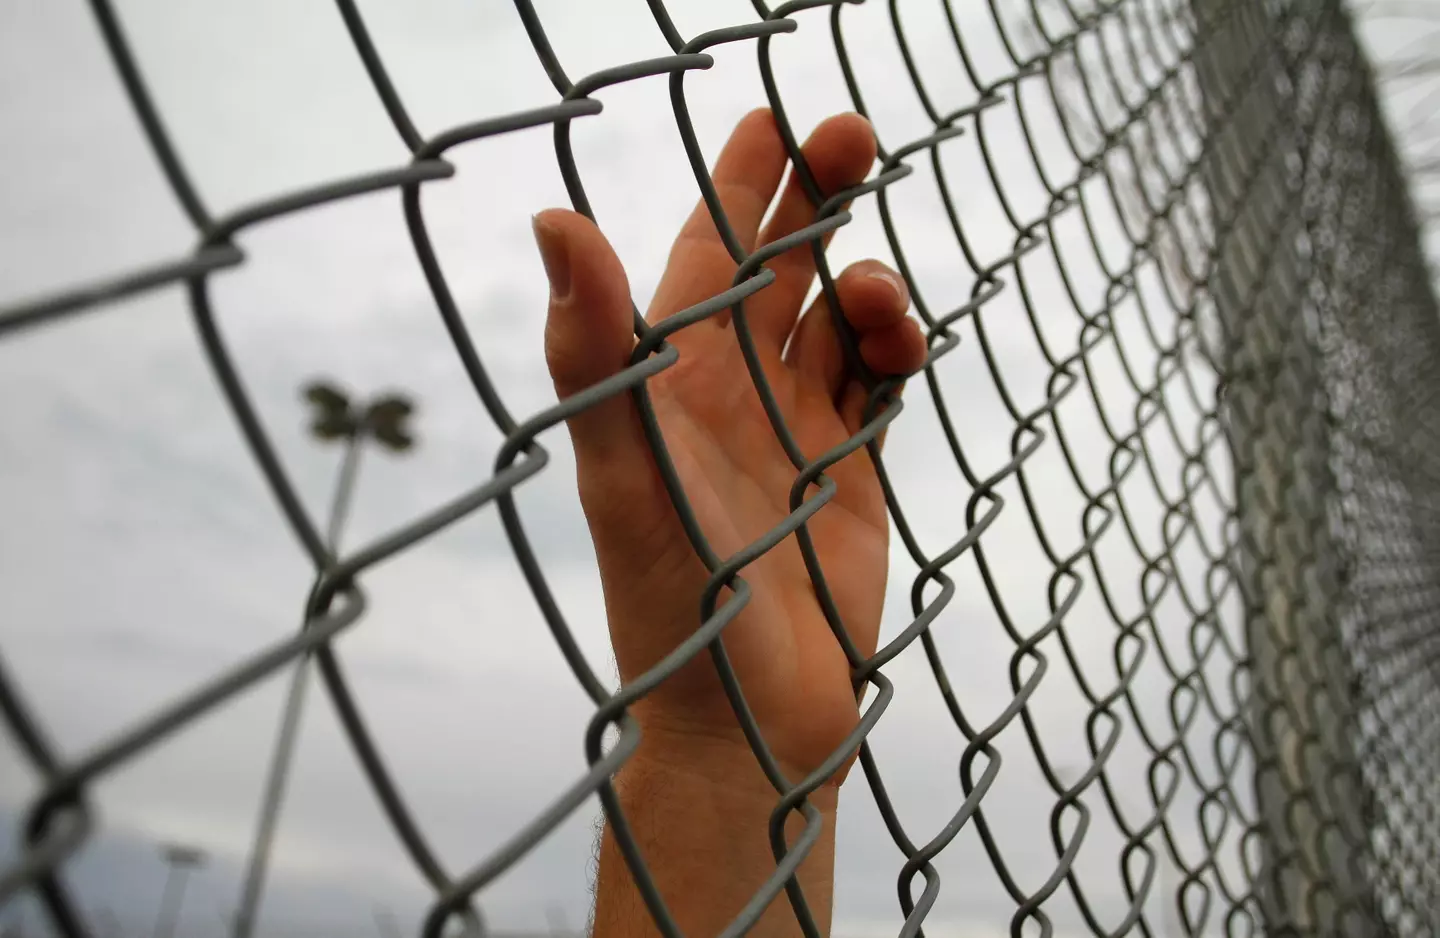 Medrano joined the gang while in prison in Arizona and remained a member even after he was released. (Stock image).